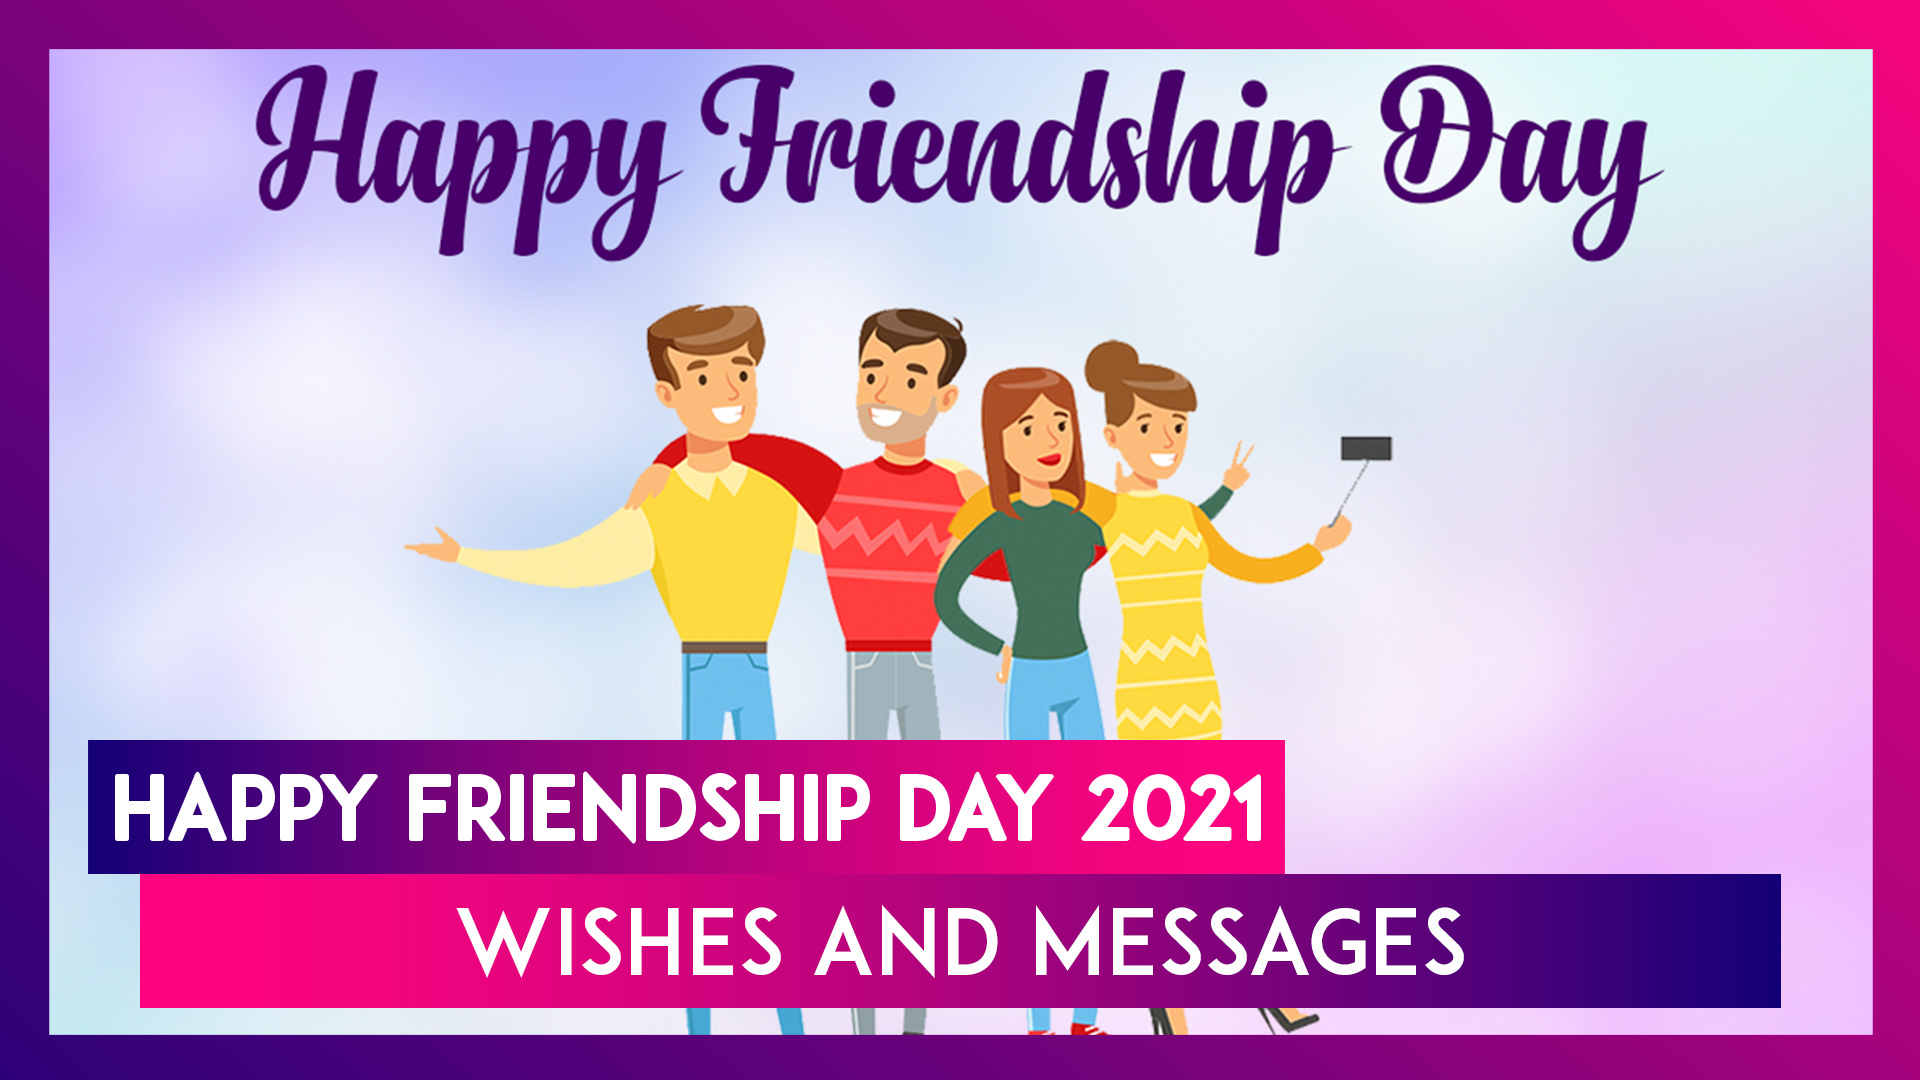 Happy Friendship Day 2021 Wishes: WhatsApp Greetings, Quotes and Messages To Share With Best Friends